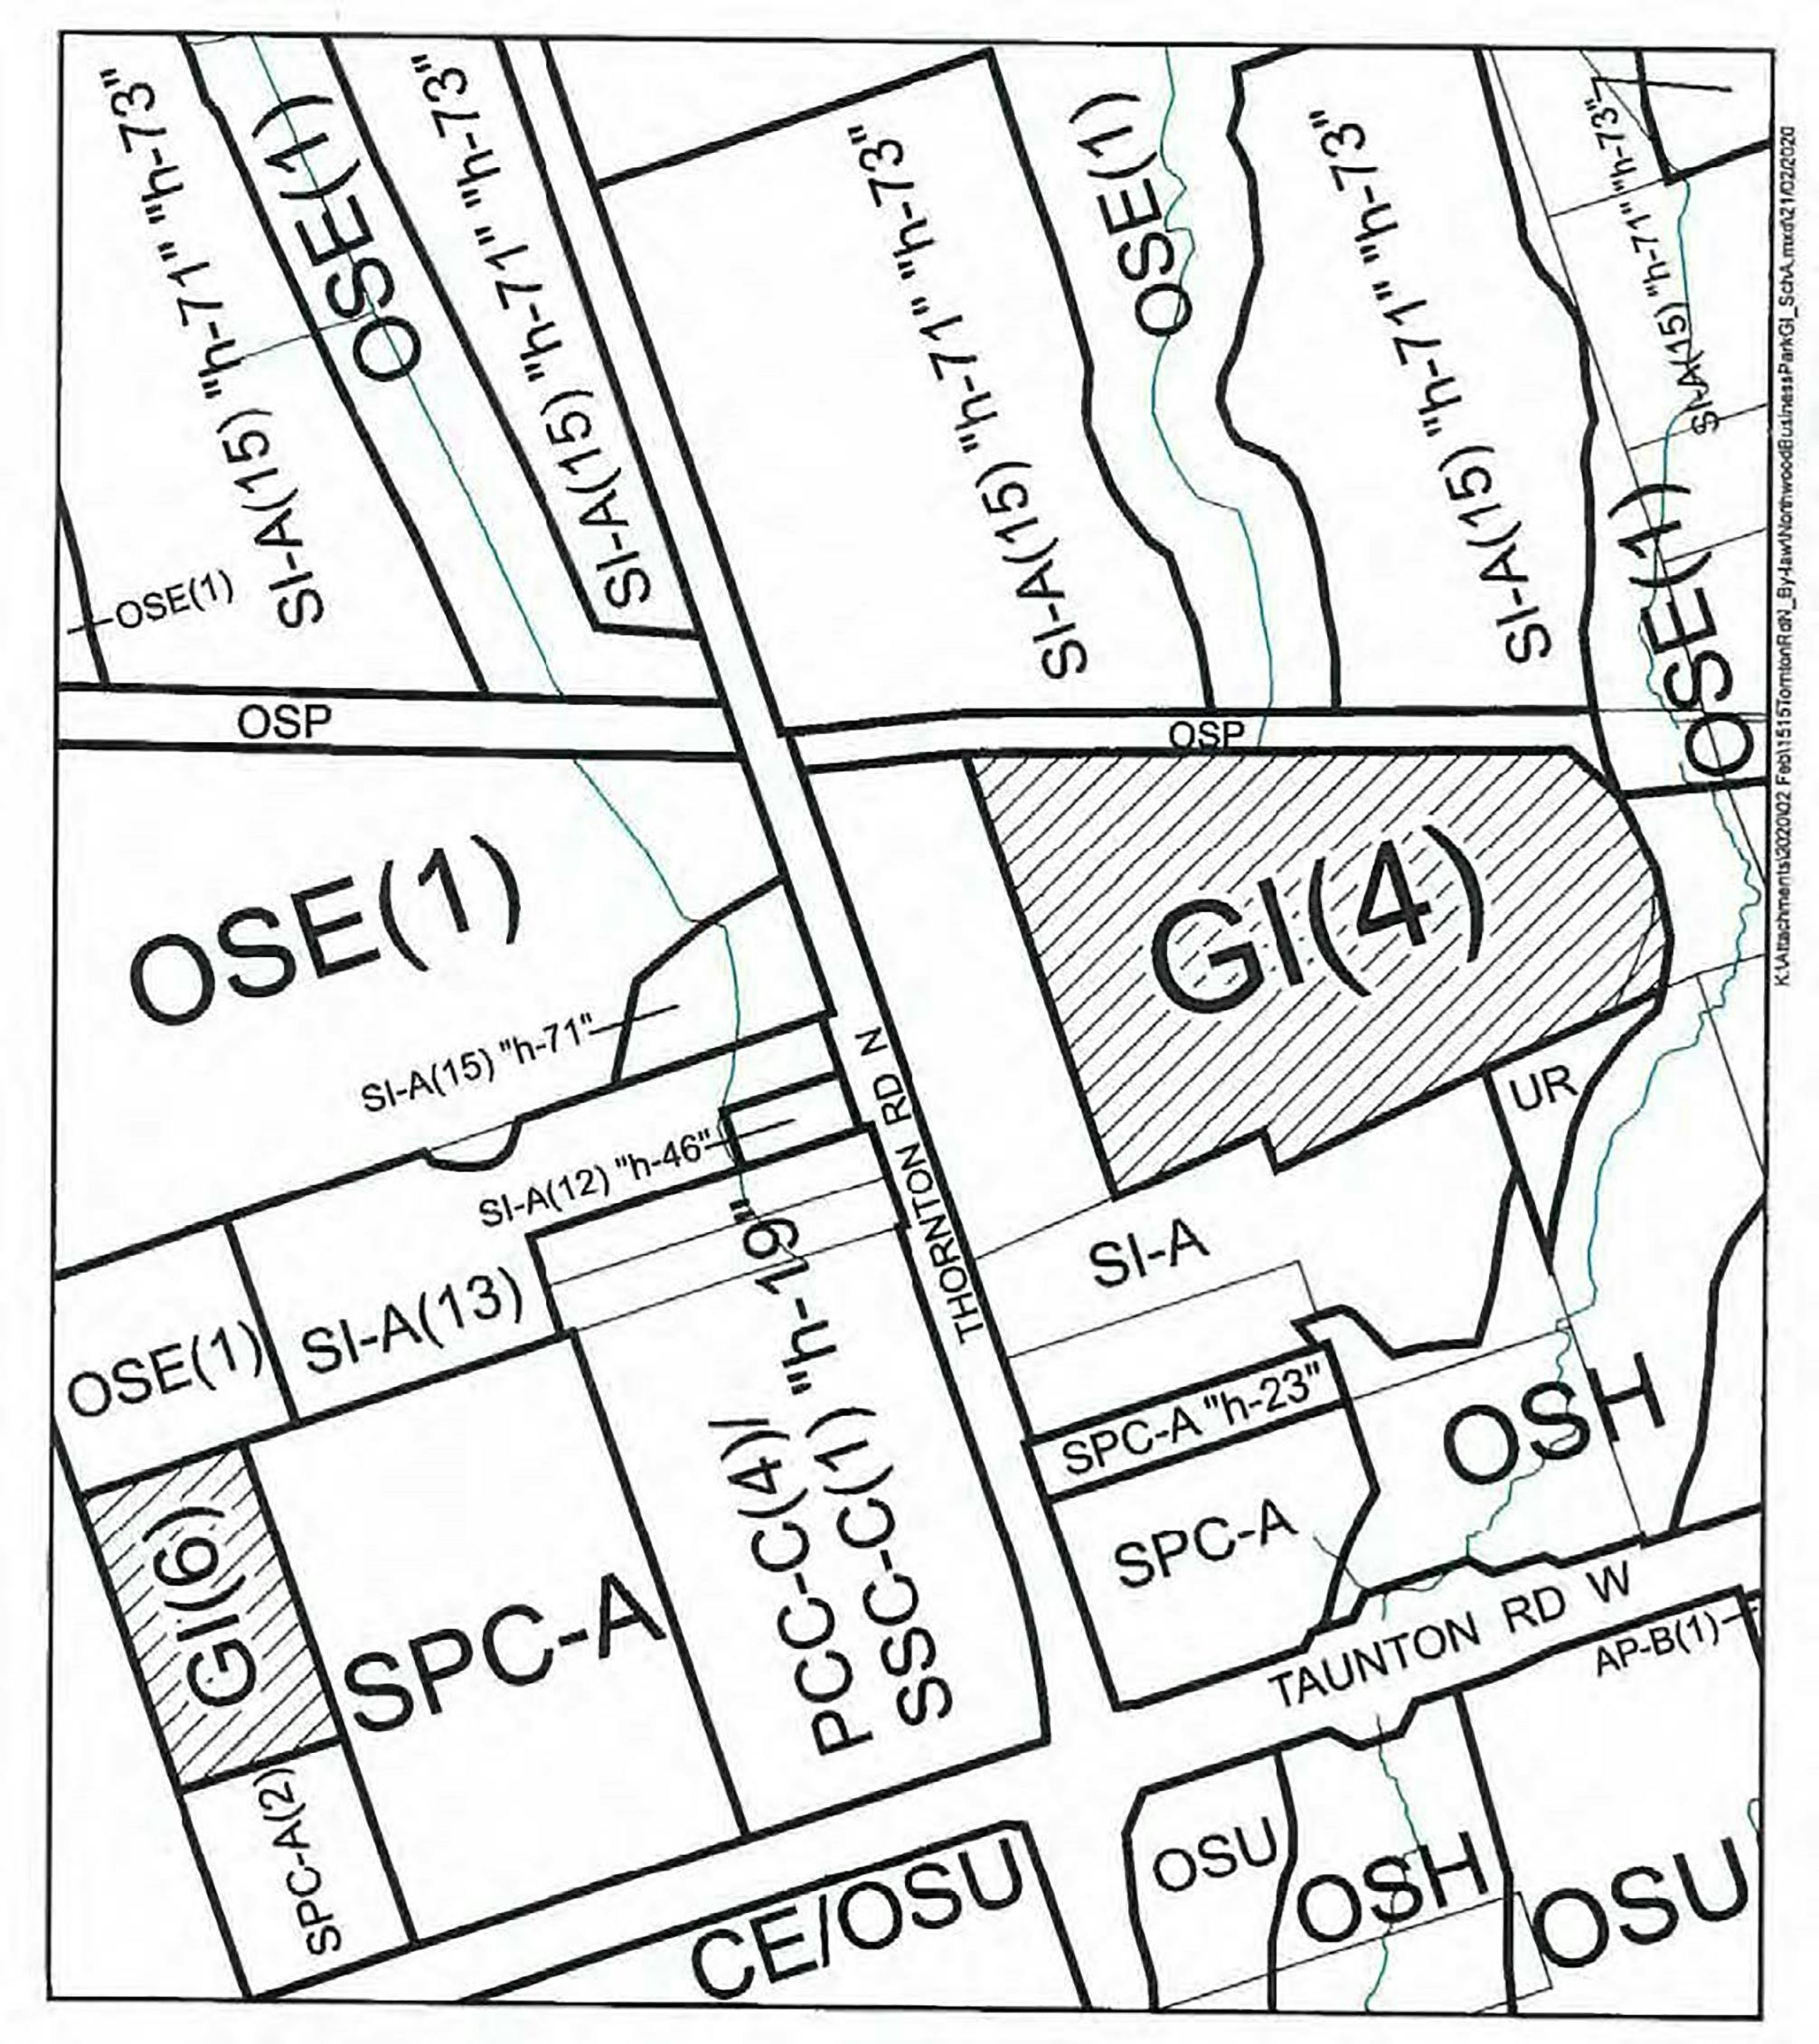 The land use study is reviewing the appropriateness of the GI zoning which currently applies to the northern portion of 918 Taunton Rd. W.; and a portion of 1455, 1515 and 1517 Thornton Rd. N. (refer to shaded areas on the map)